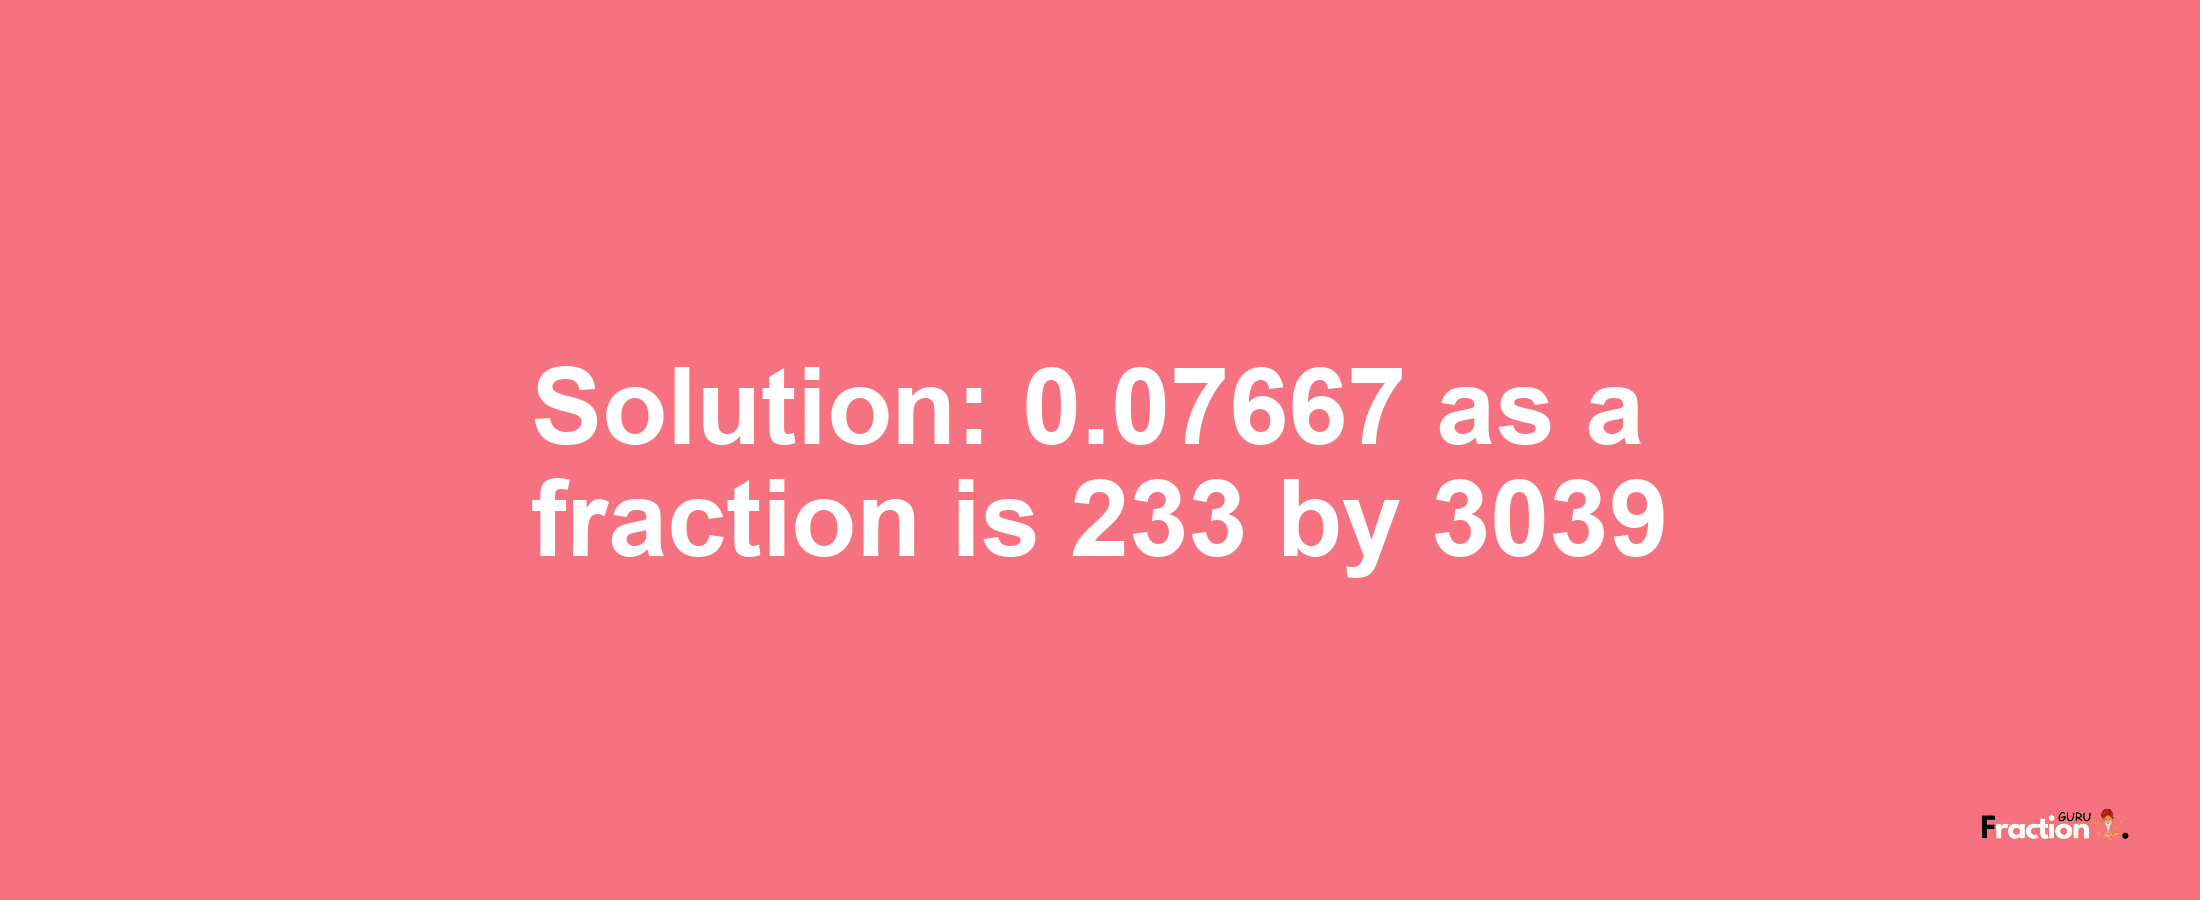 Solution:0.07667 as a fraction is 233/3039